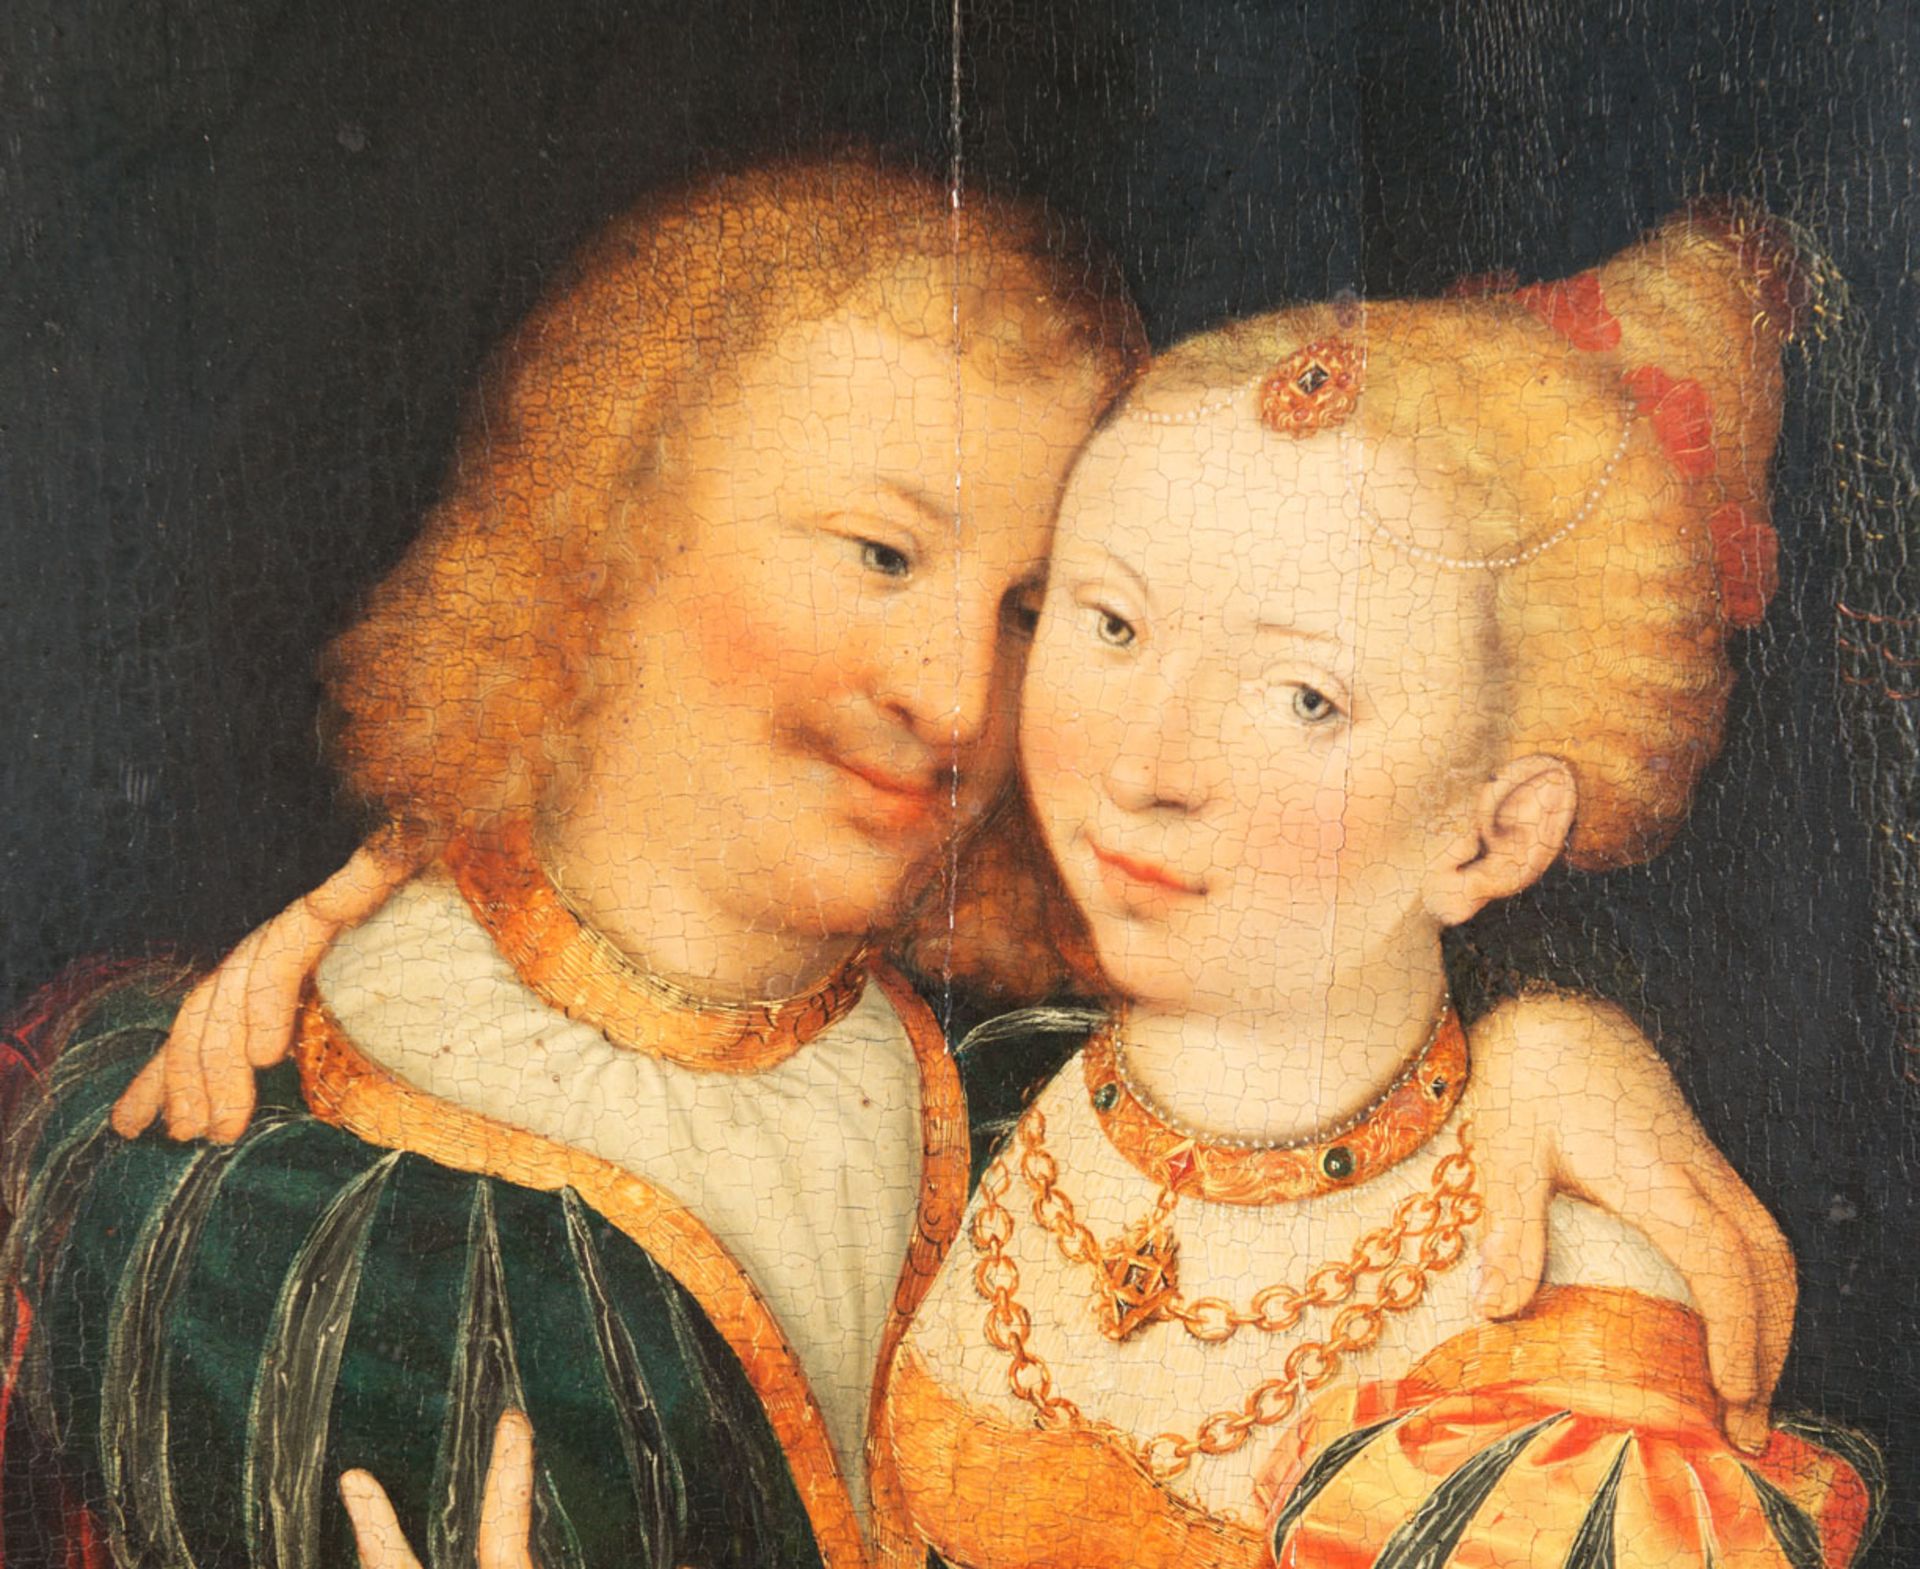 Lucas Cranach the Younger (1515-1586)-attributed - Image 3 of 3